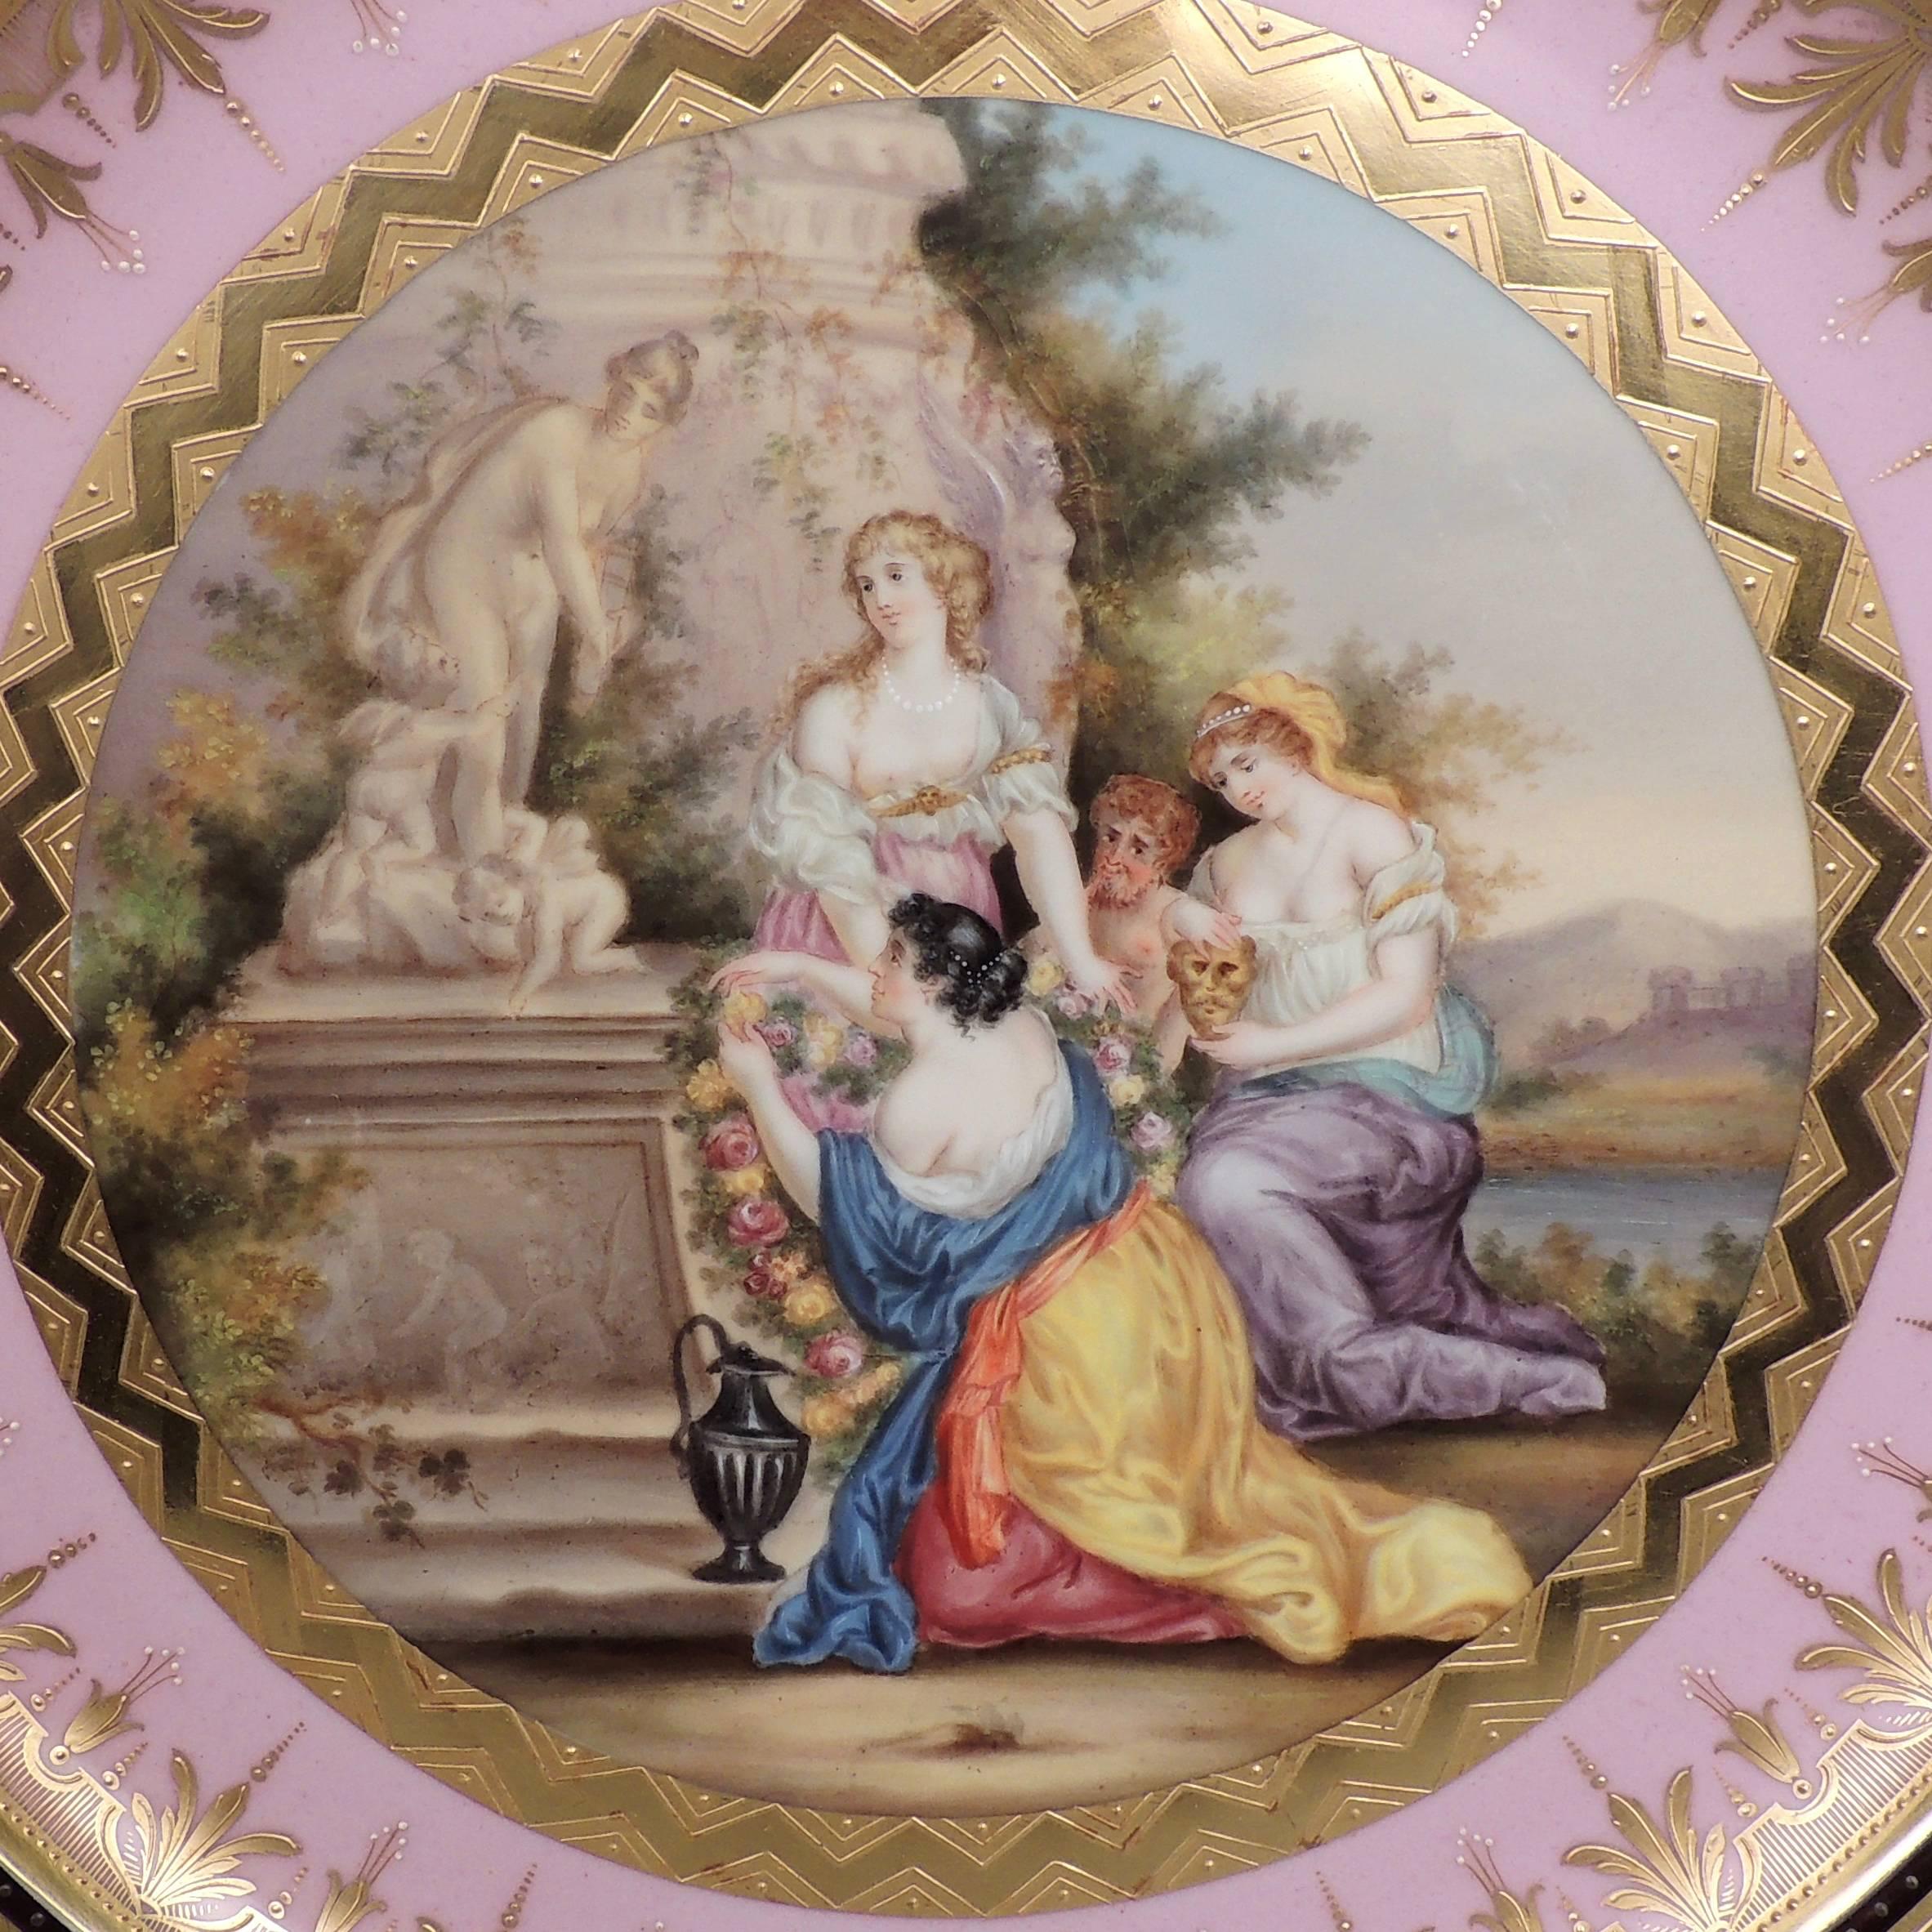 A good octagonal, pink ground, 19th century jeweled and hand-painted Royal Vienna porcelain charger. 

The reverse bears a blue beehive mark and the title 